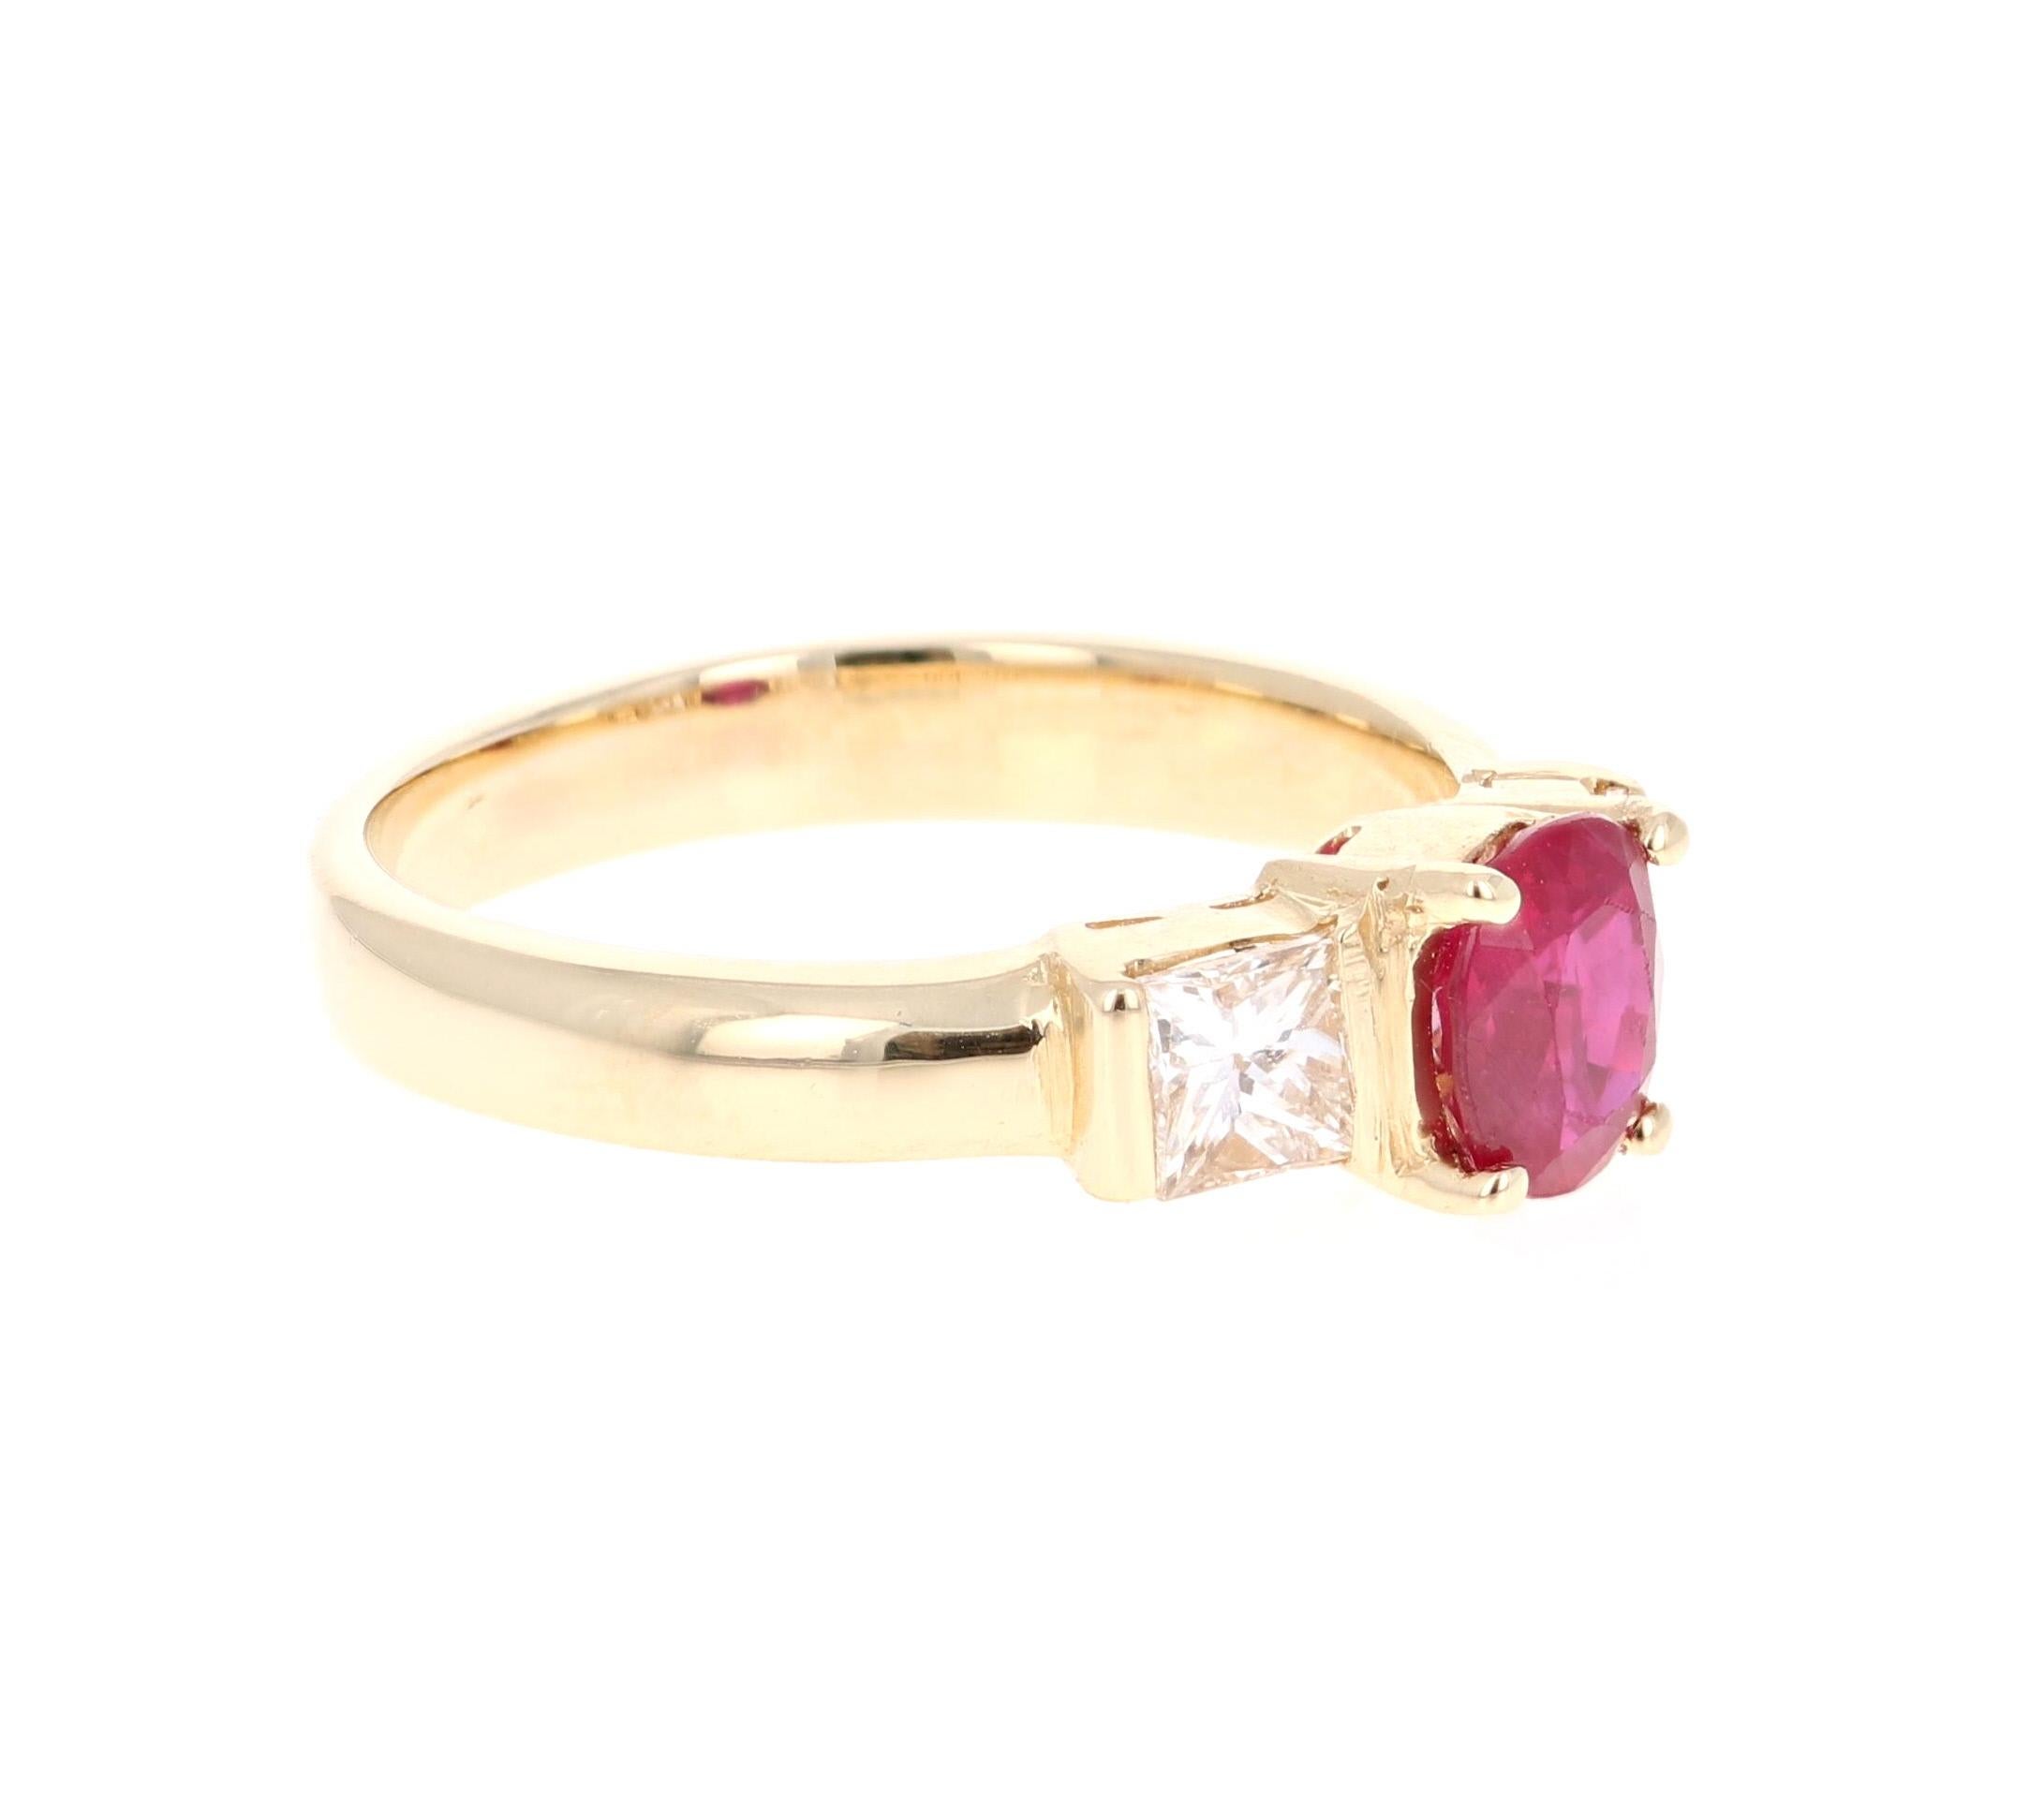 Simply beautiful 3-Stone Ruby Diamond Ring with a Oval Cut 1.08 Carat Ruby which is surrounded by 2 Princess Cut Diamonds that weigh 0.64 carats. The total carat weight of the ring is 1.72 carats. The clarity and color of the diamonds are VS-H.

The